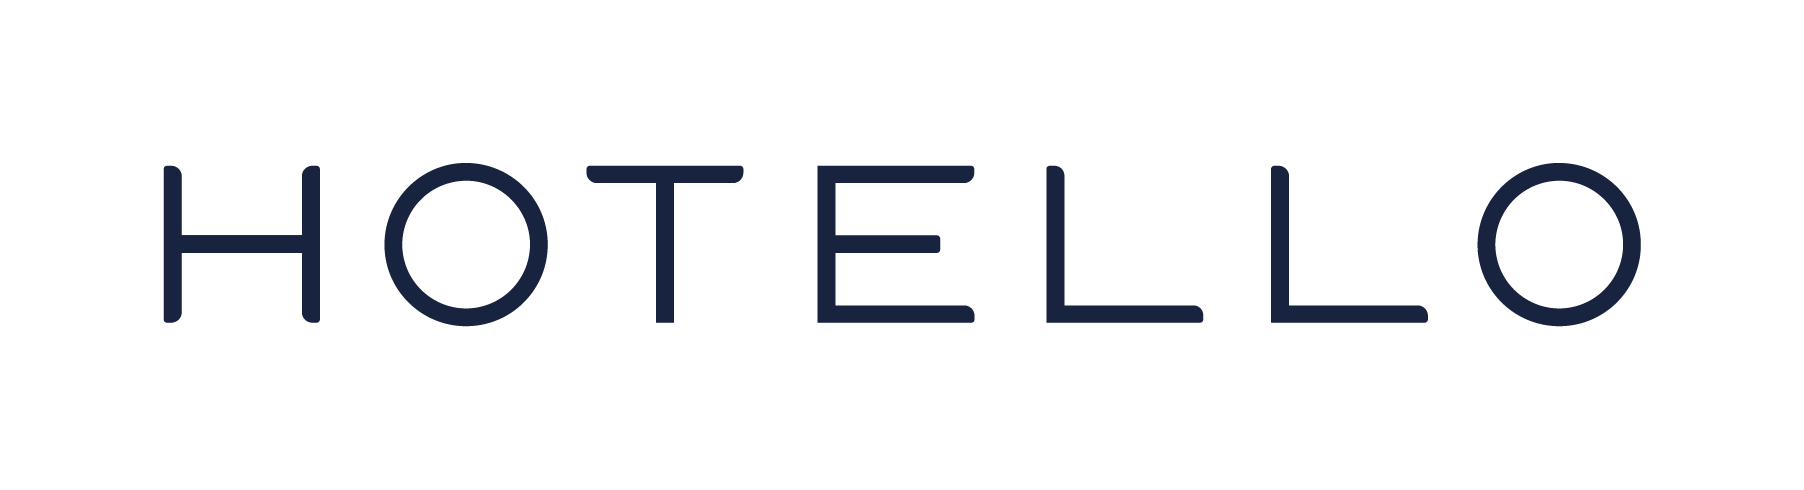 Hotello is a TrustYou Technology Partner